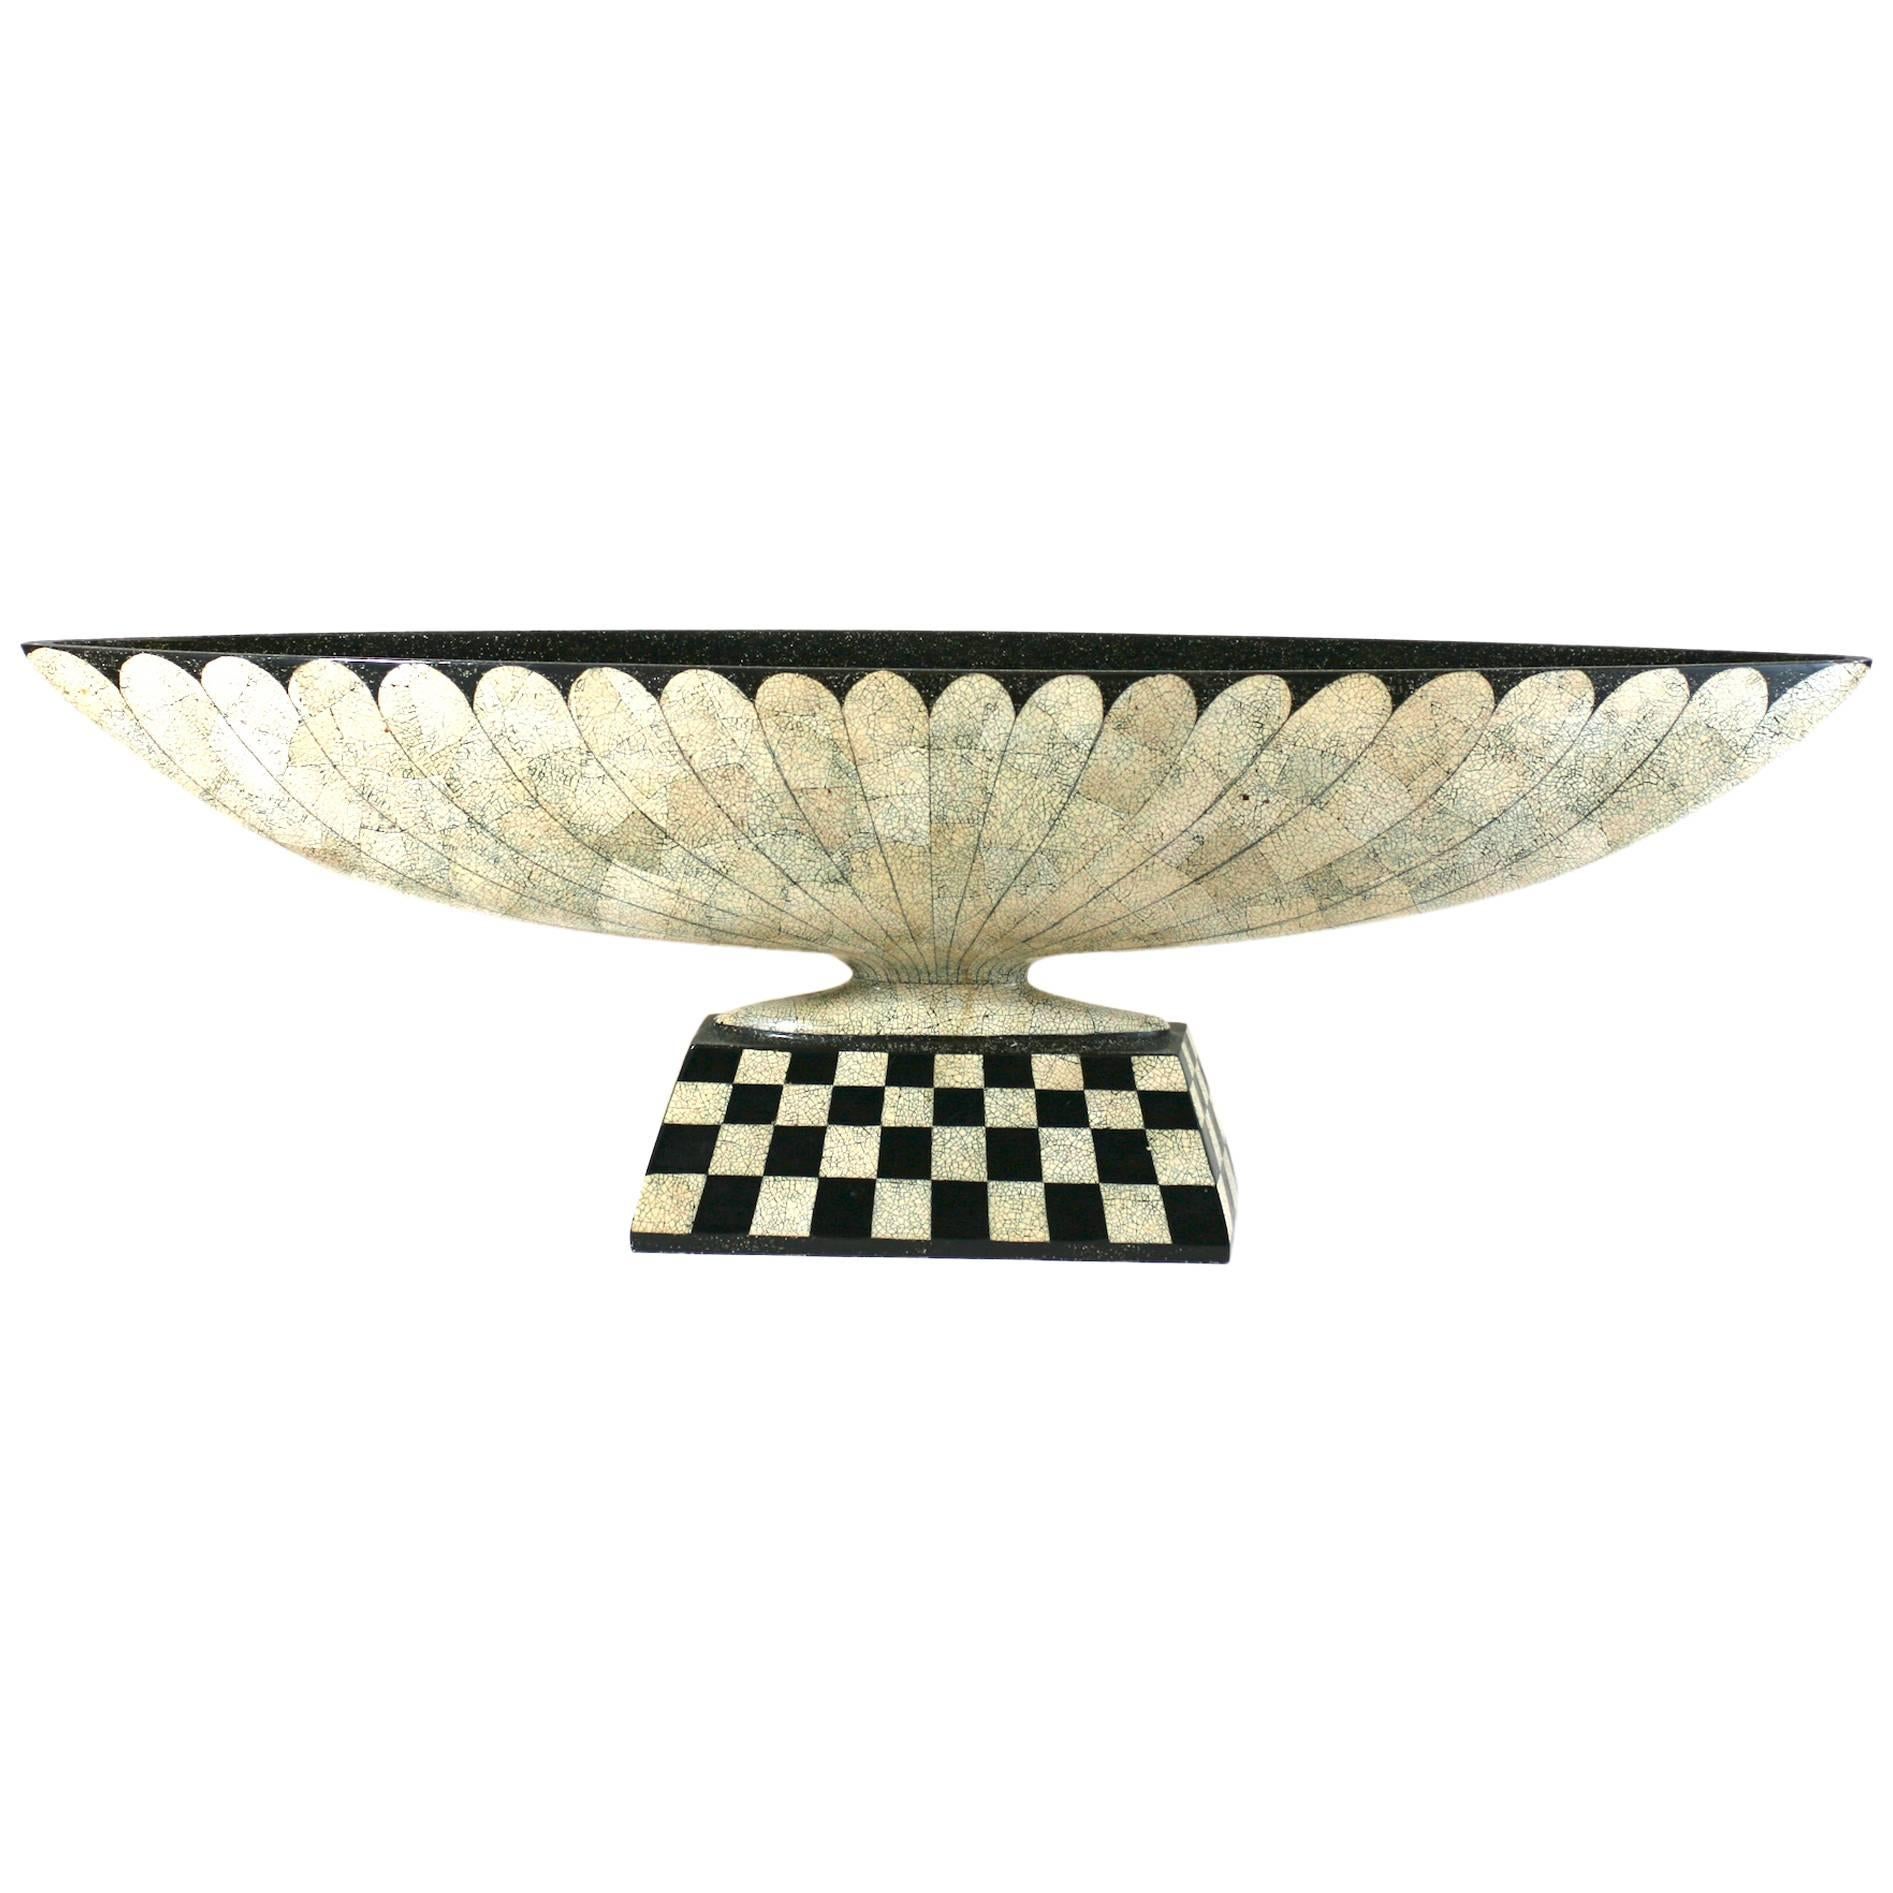 Art Deco Revival Lacquer and Eggshell Tazza For Sale